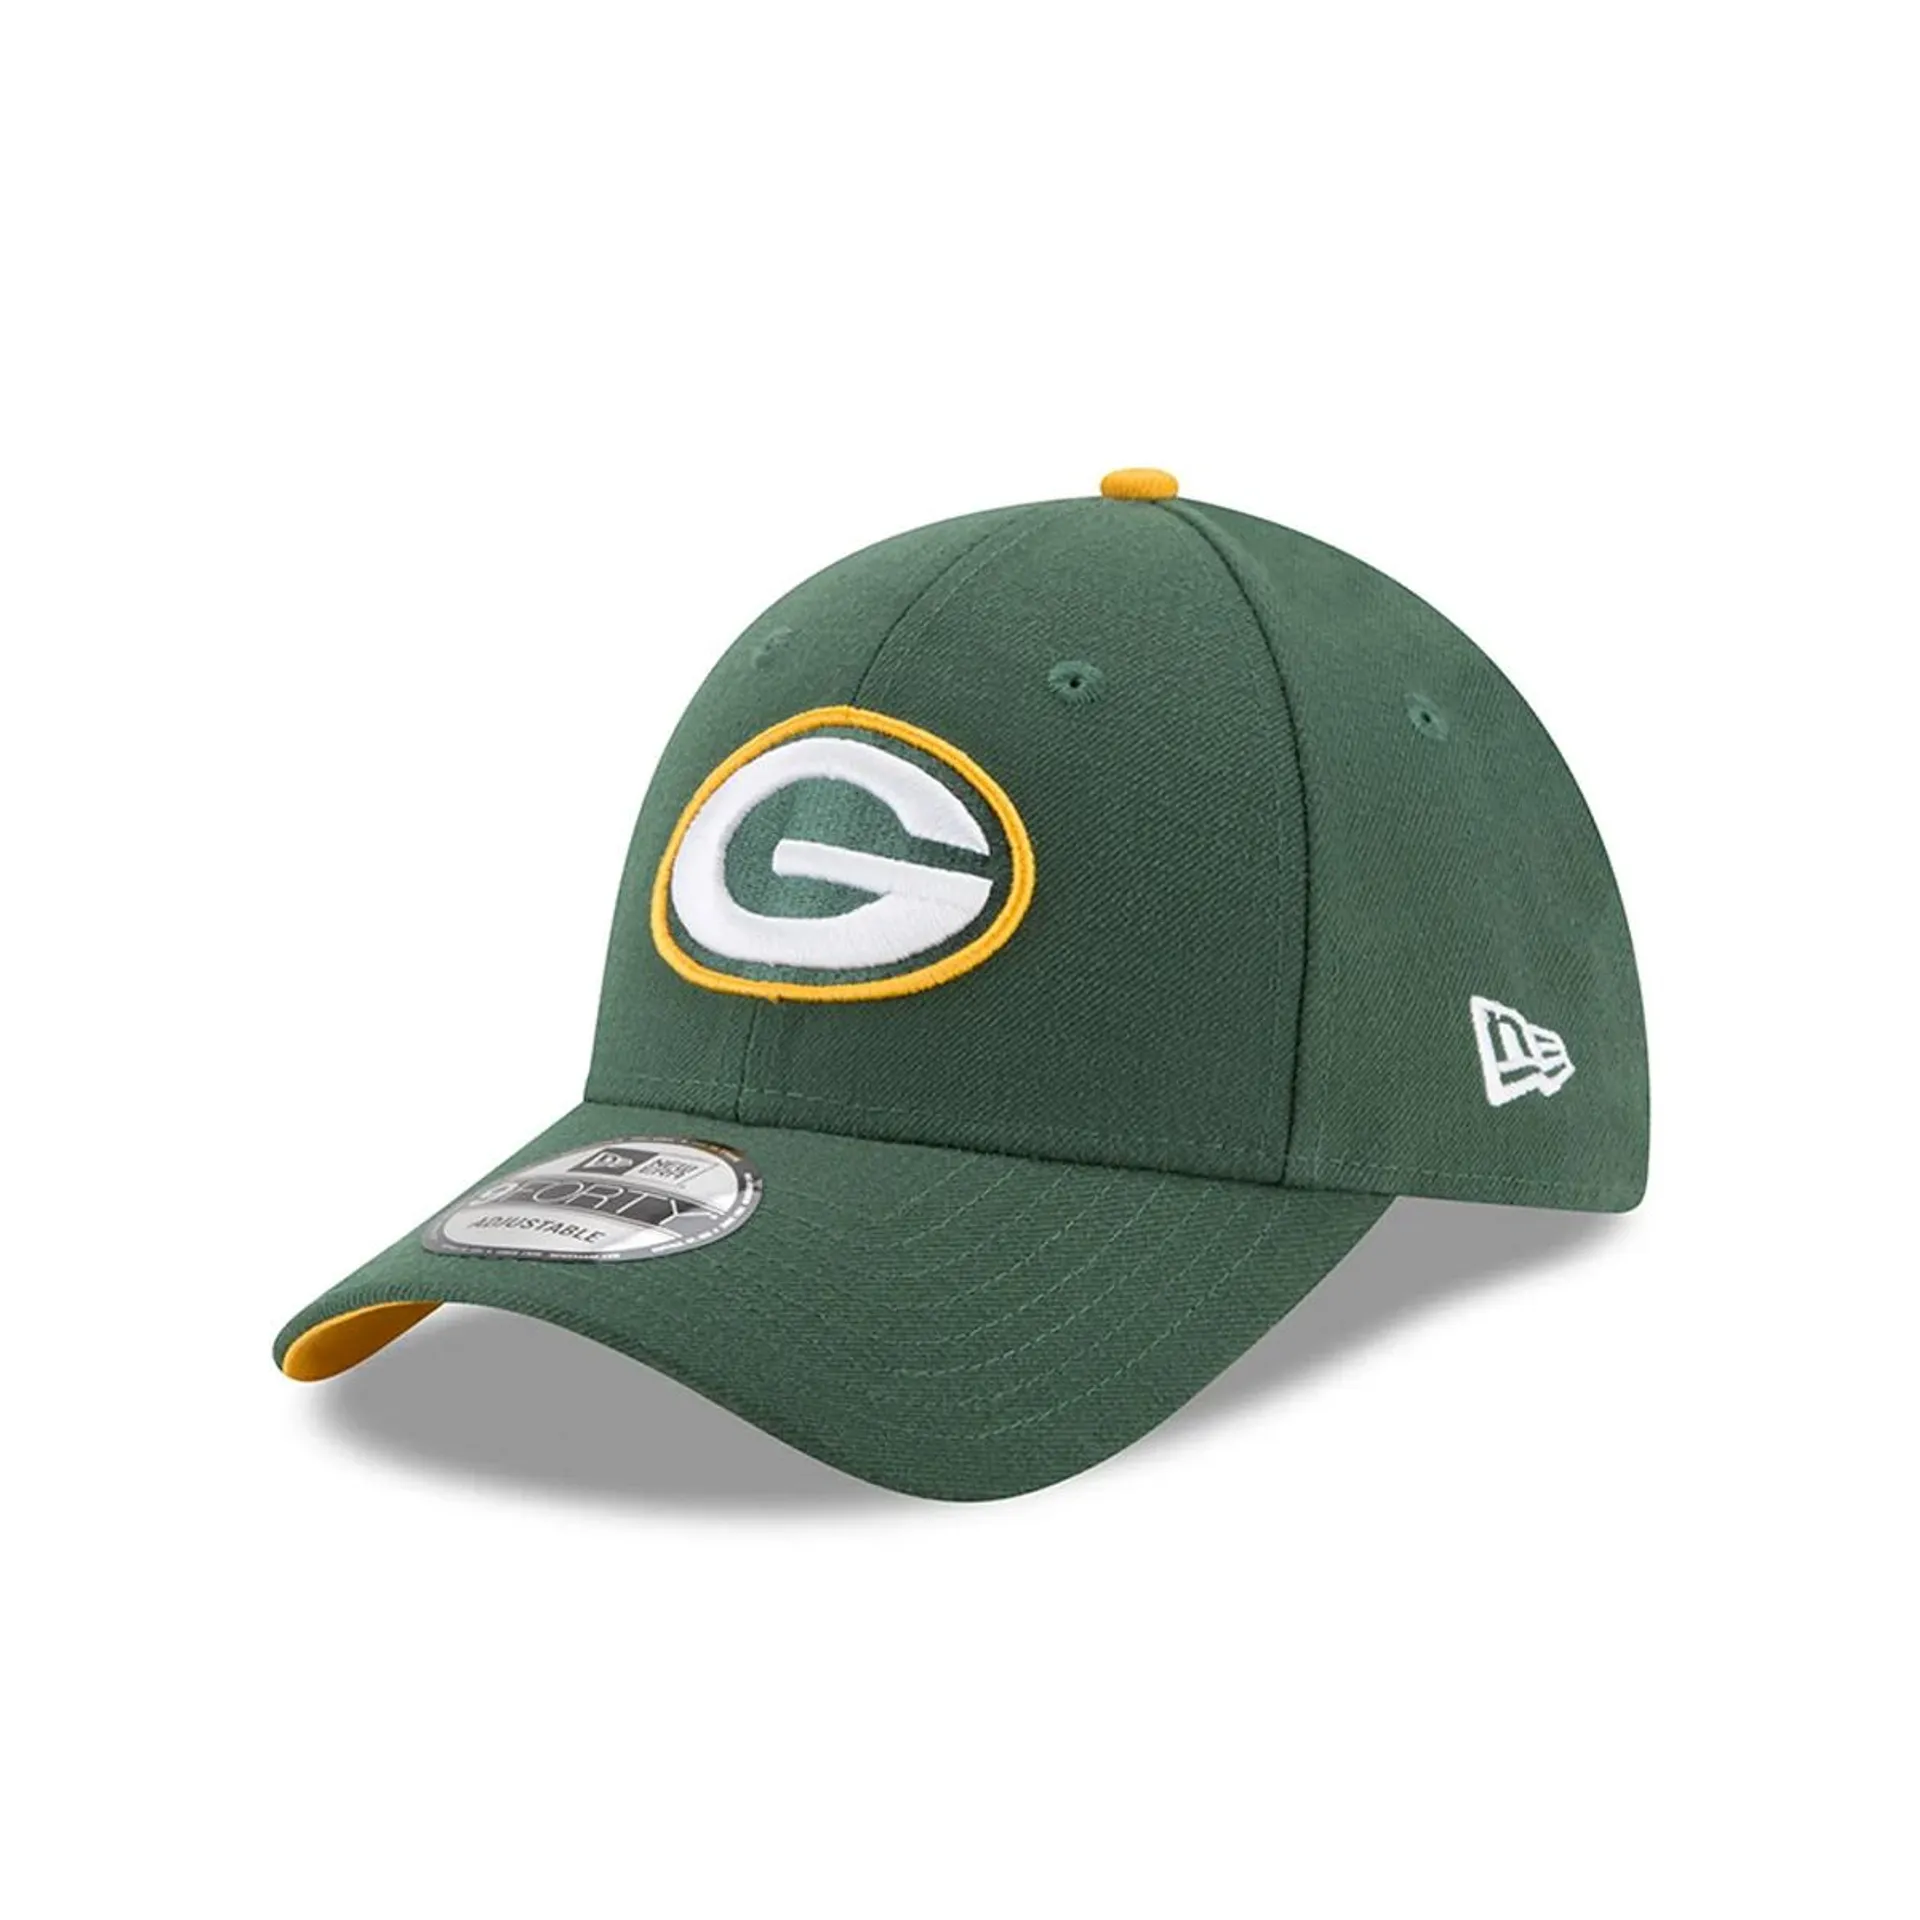 New Era 9Forty Green Bay Packers Cap